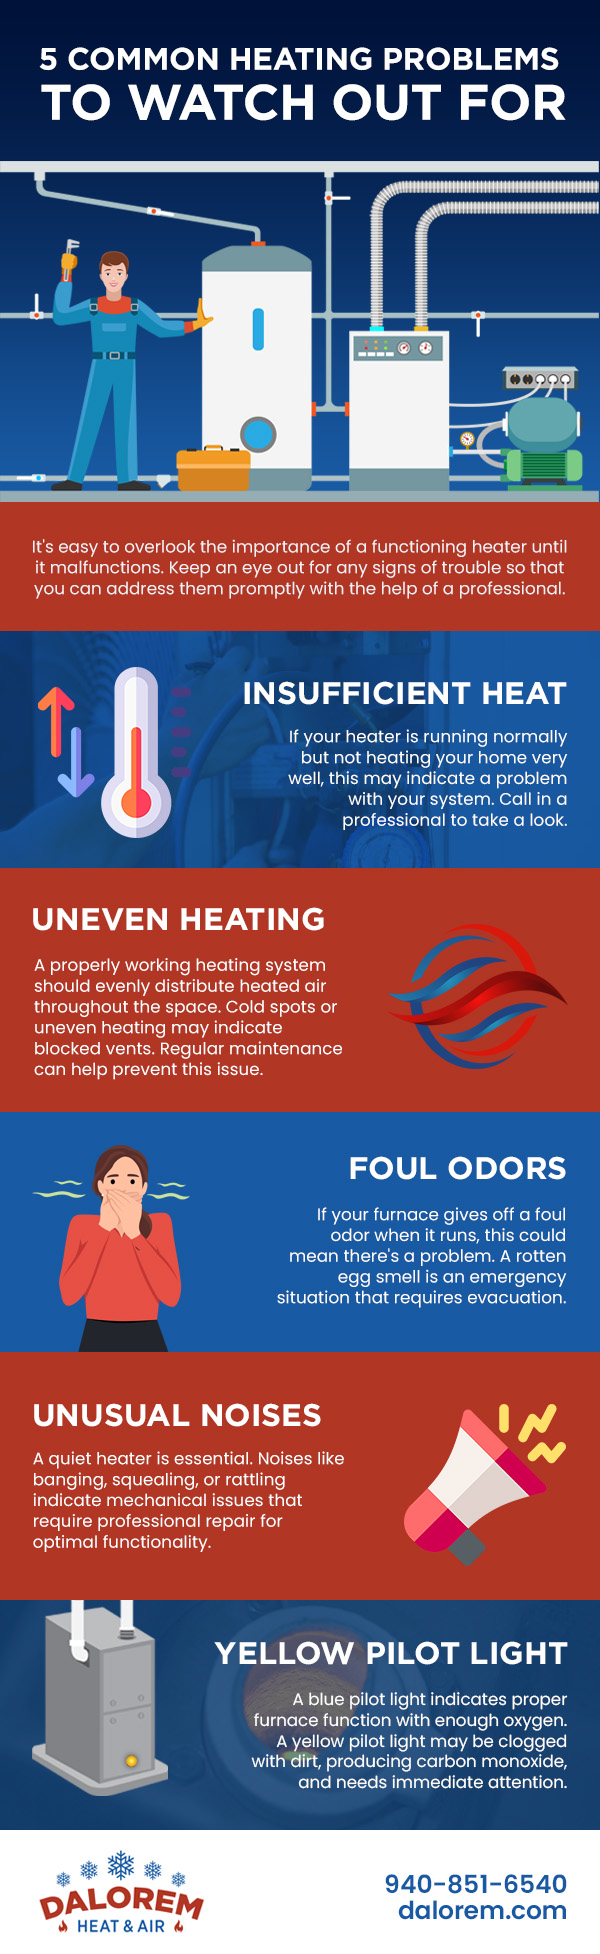 5 Common Heating Problems to Watch Out For